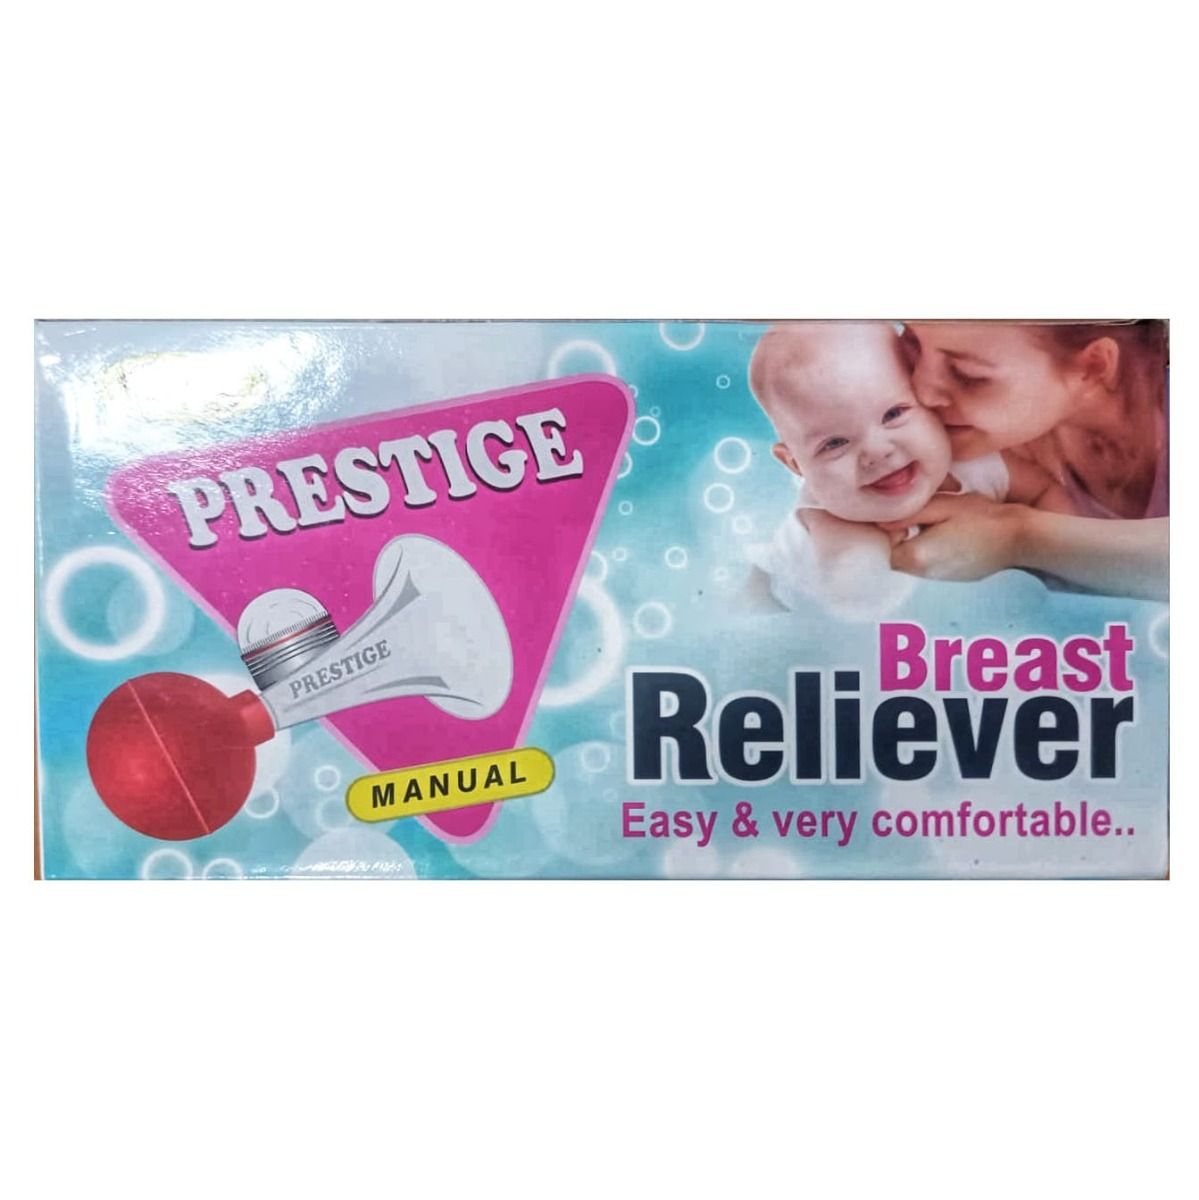 Prestige Breast Reliever Manual Breast Pump, 1 Count, Pack of 1 